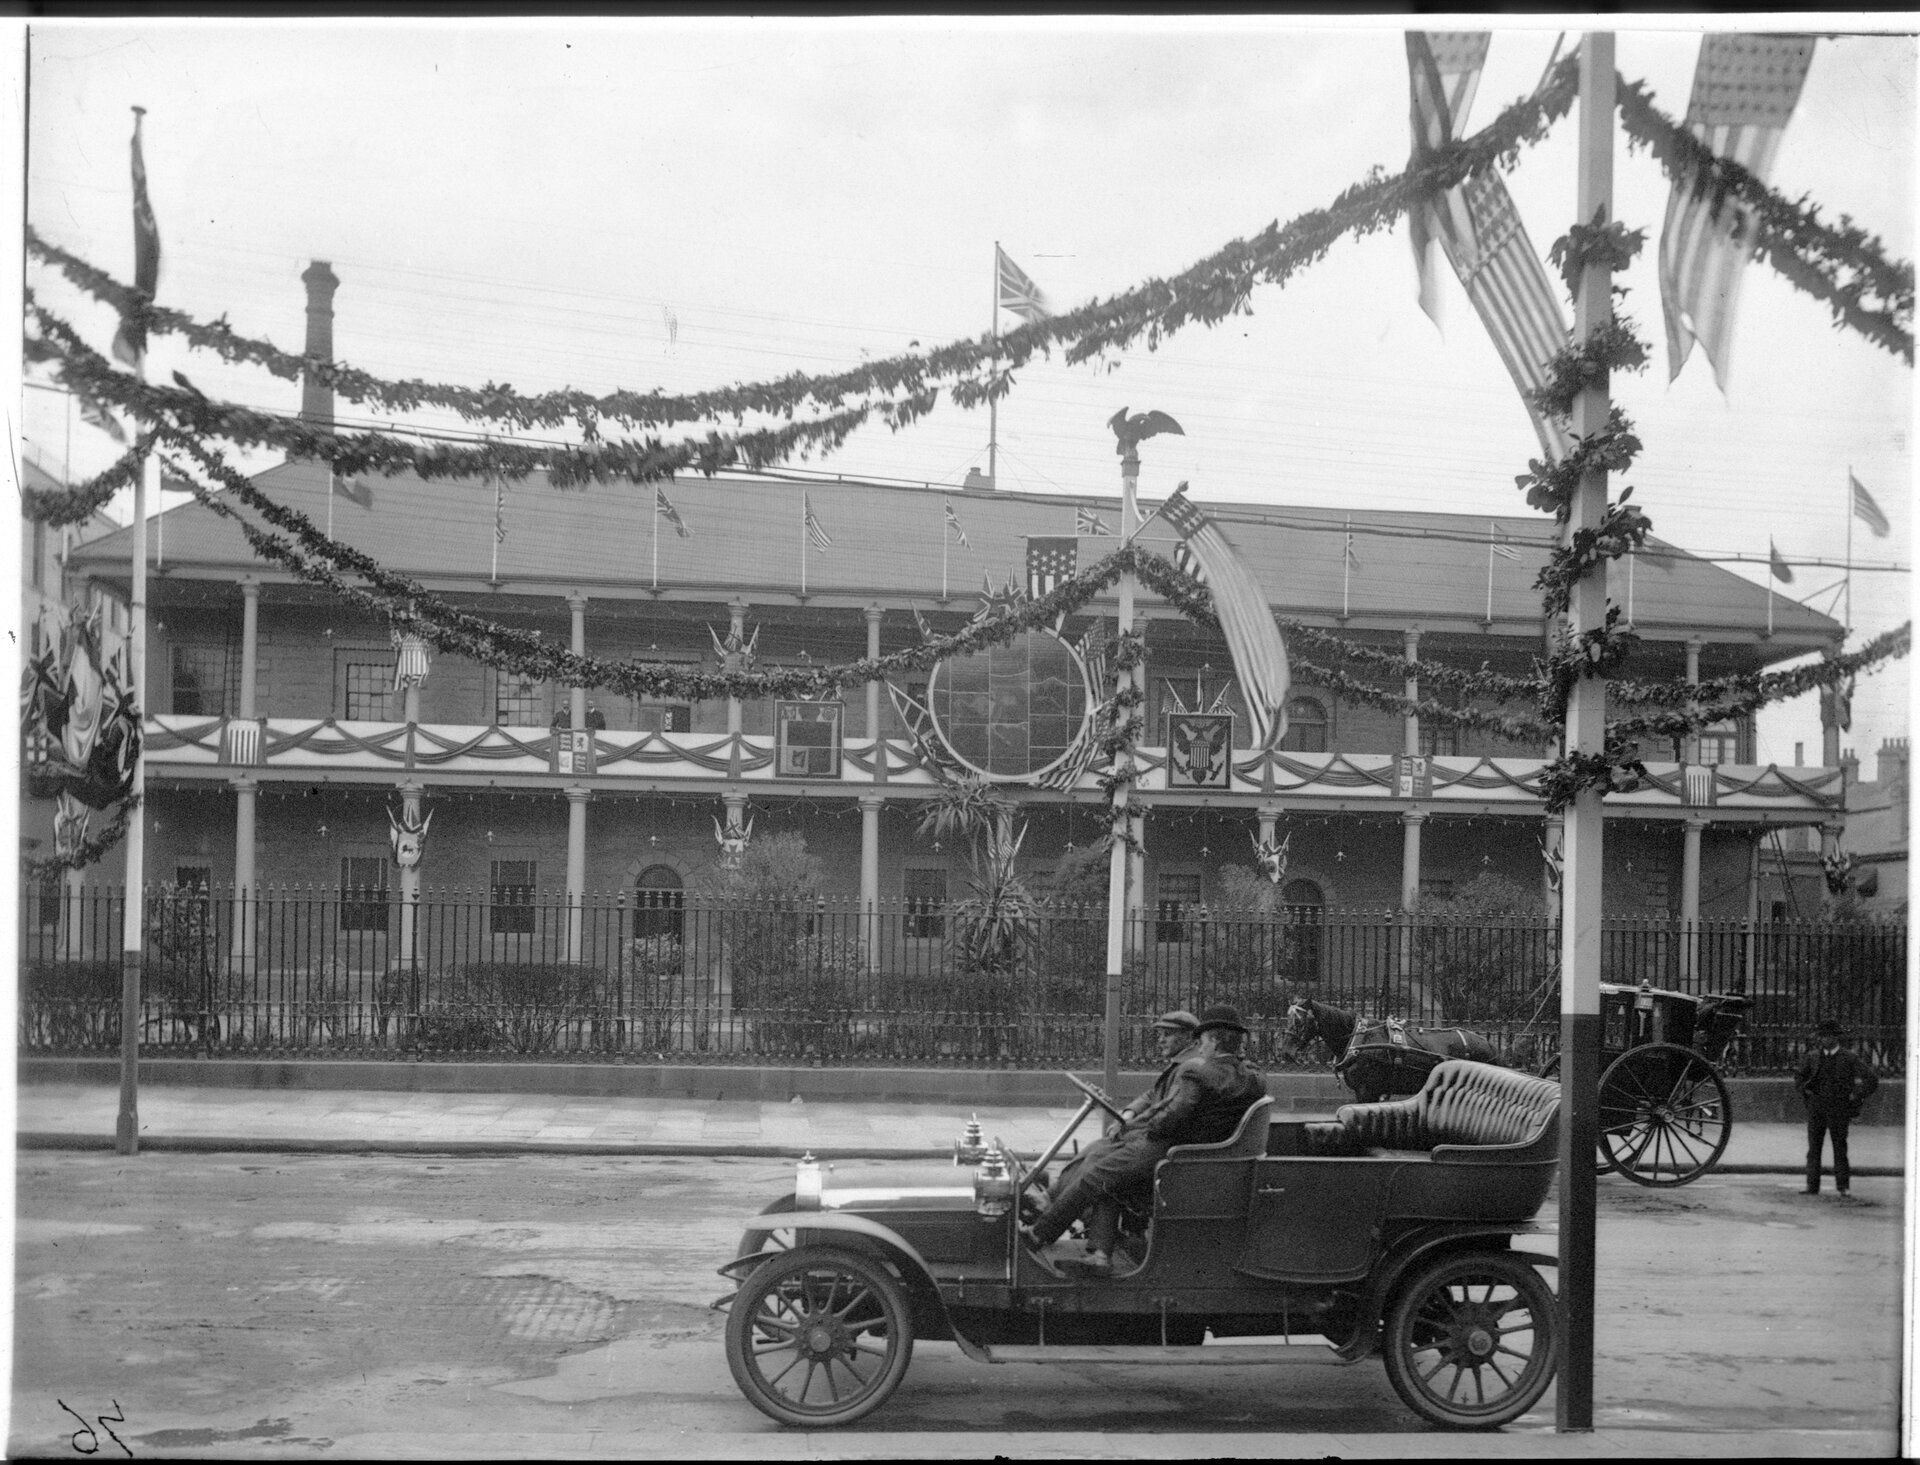 An open top car parked in front of the Mint which has been decorated with streamers and signs